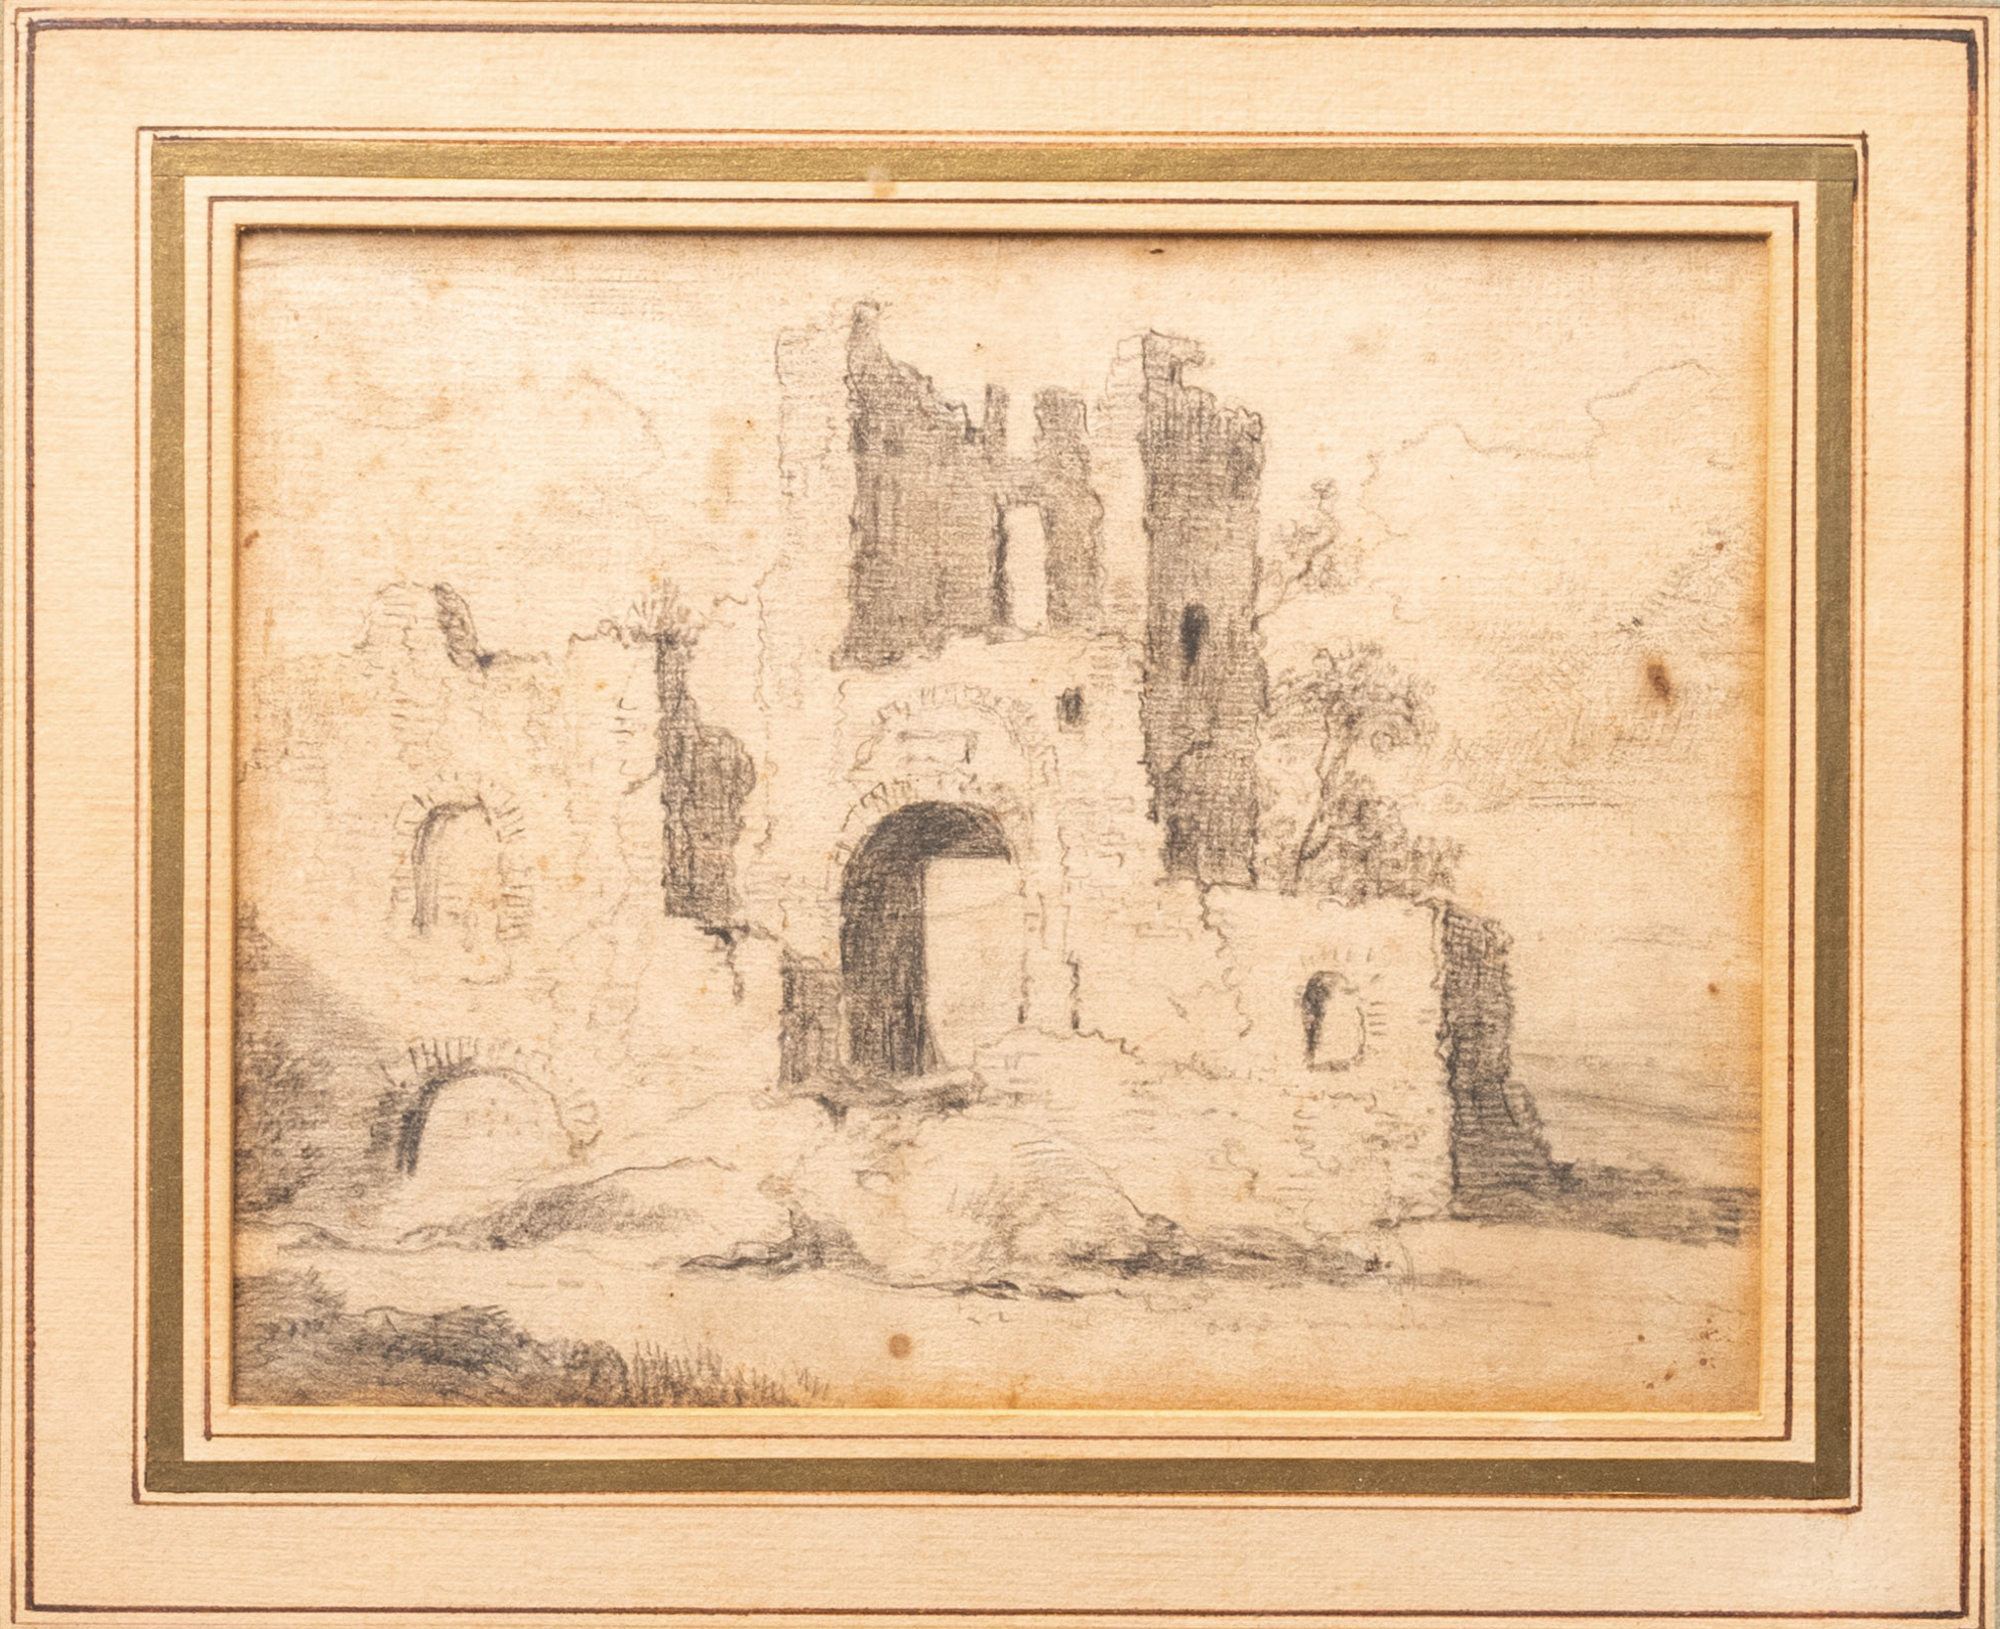 Attr. to Jacob van Ruisdael (1628/9 - 1682), pencil on paper: Landscape with ruins - Image 3 of 3